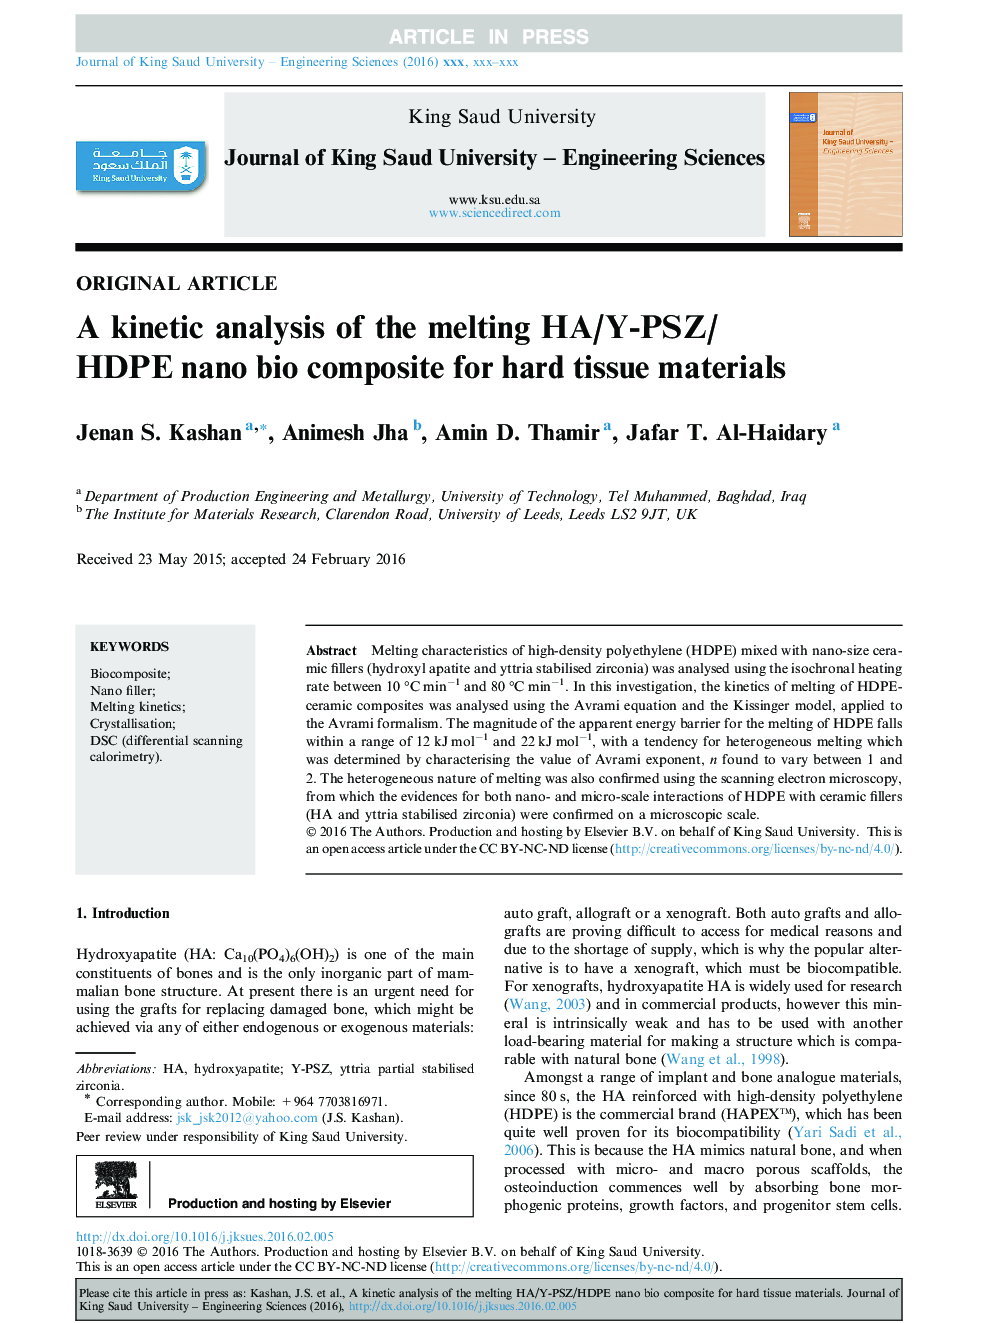 A kinetic analysis of the melting HA/Y-PSZ/HDPE nano bio composite for hard tissue materials